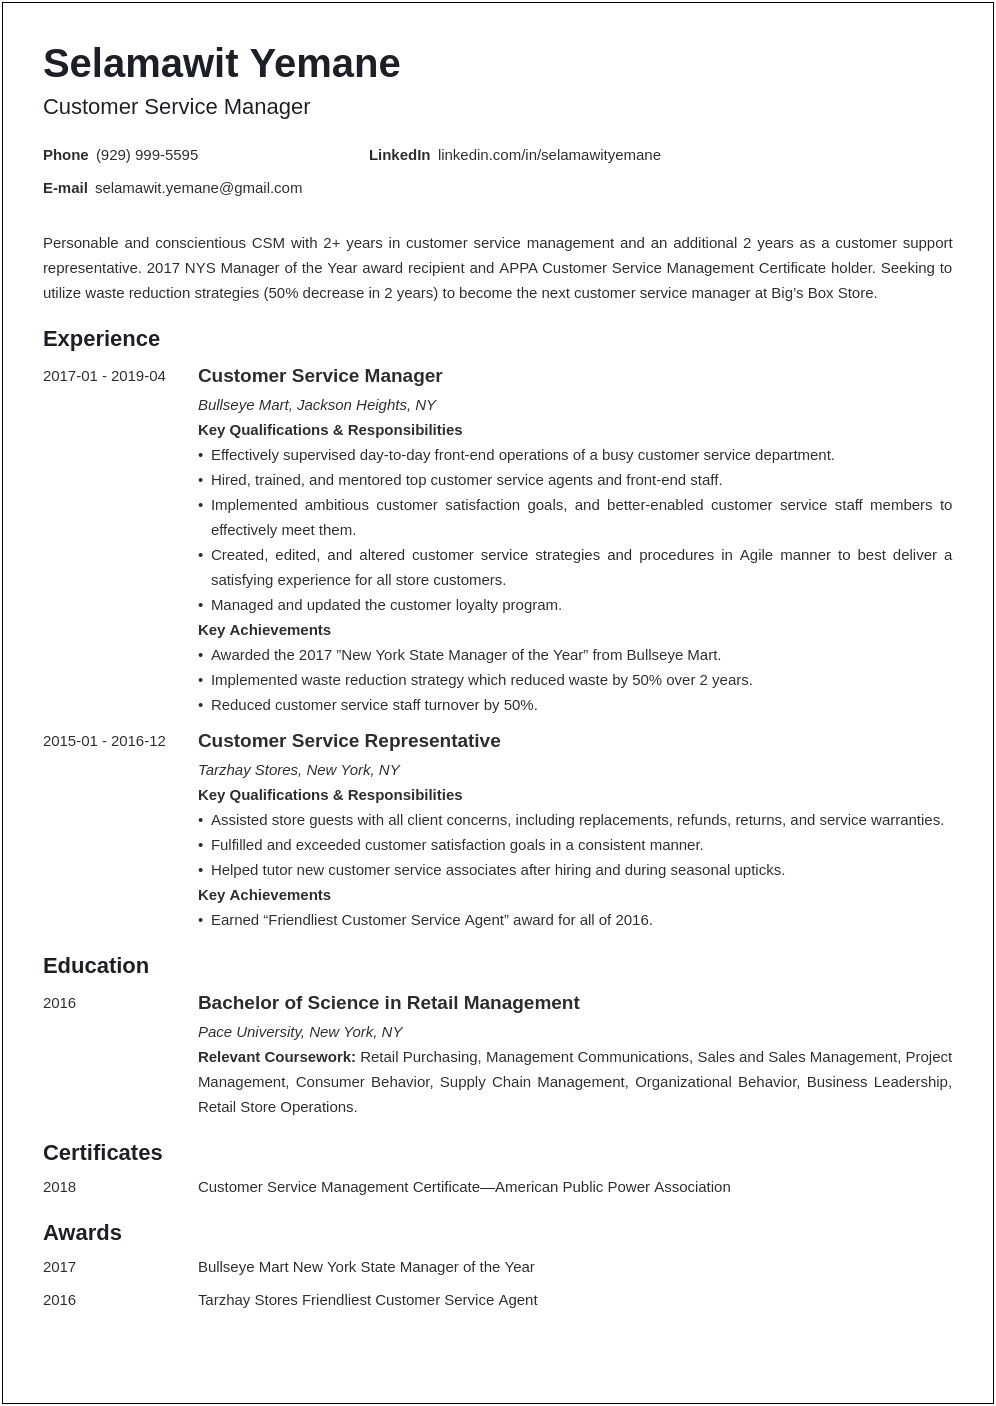 Resume Examples For Guest Service Agent